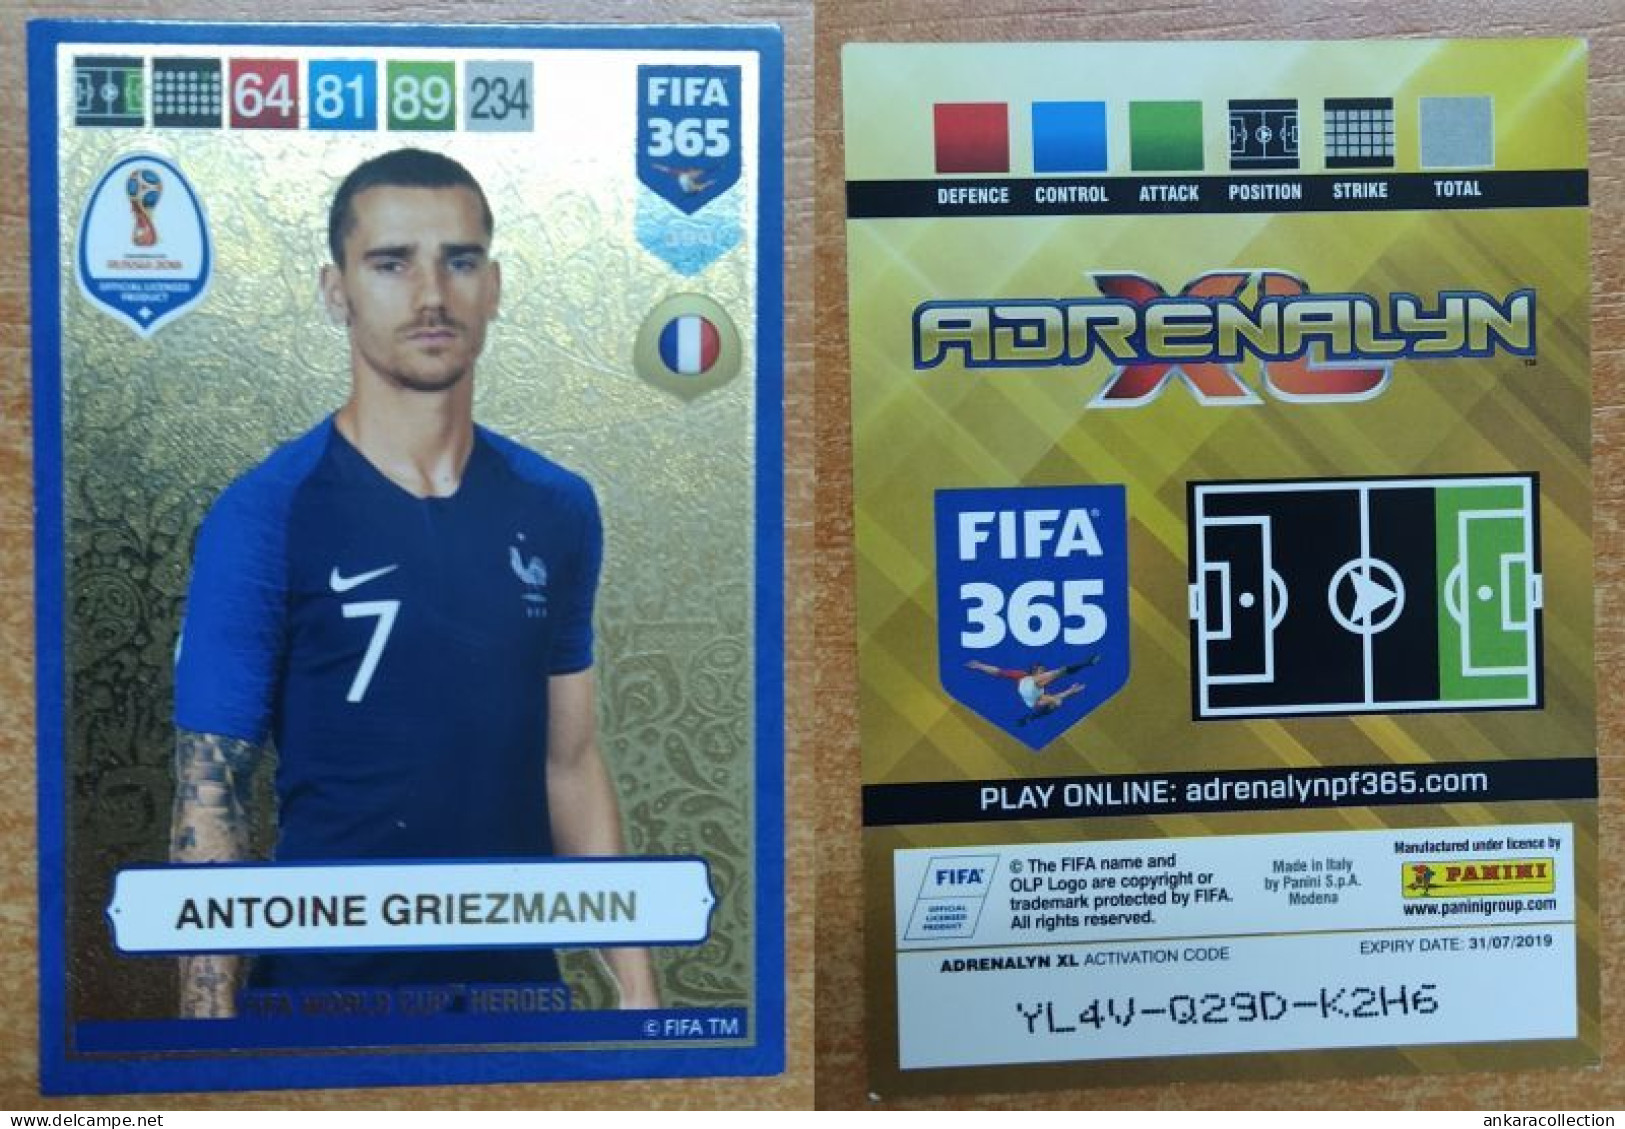 AC - 394 ANTOINE GRIEZMANN  FIFA WORLD CUP HEROES  RUSSIA 2018  PANINI FIFA 365 2019 ADRENALYN TRADING CARD - Trading Cards